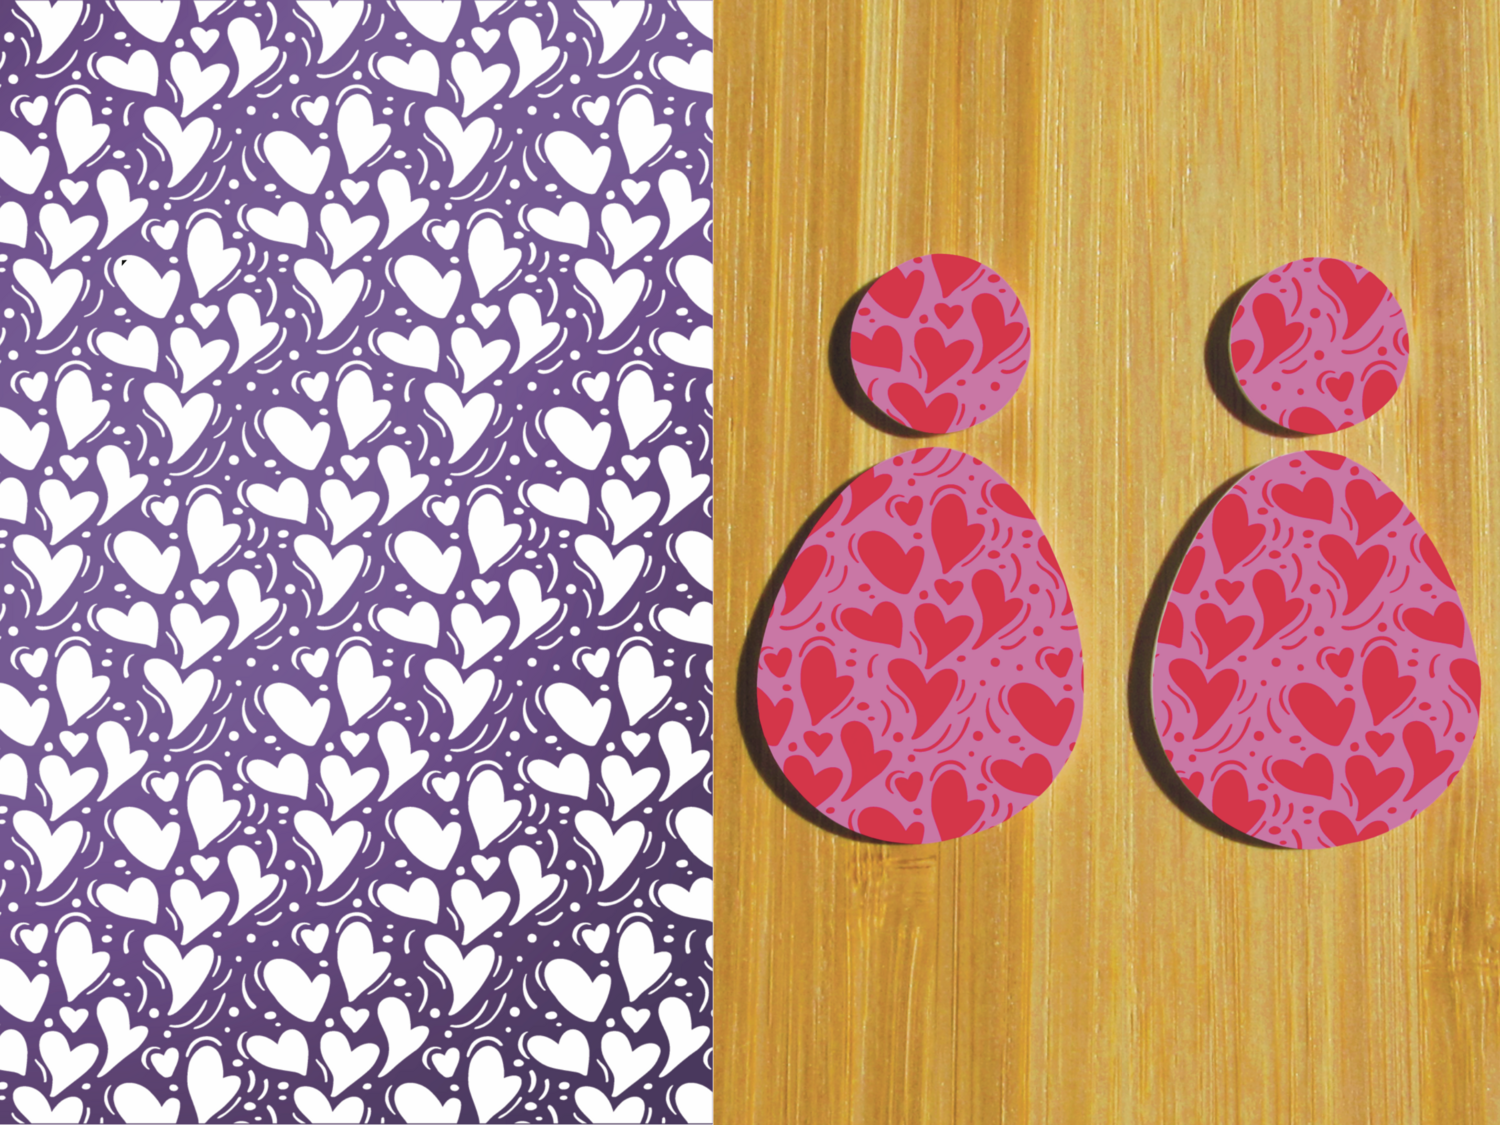 Vero Silkscreen for Polymer Clay - Love Hearts Valentines Day